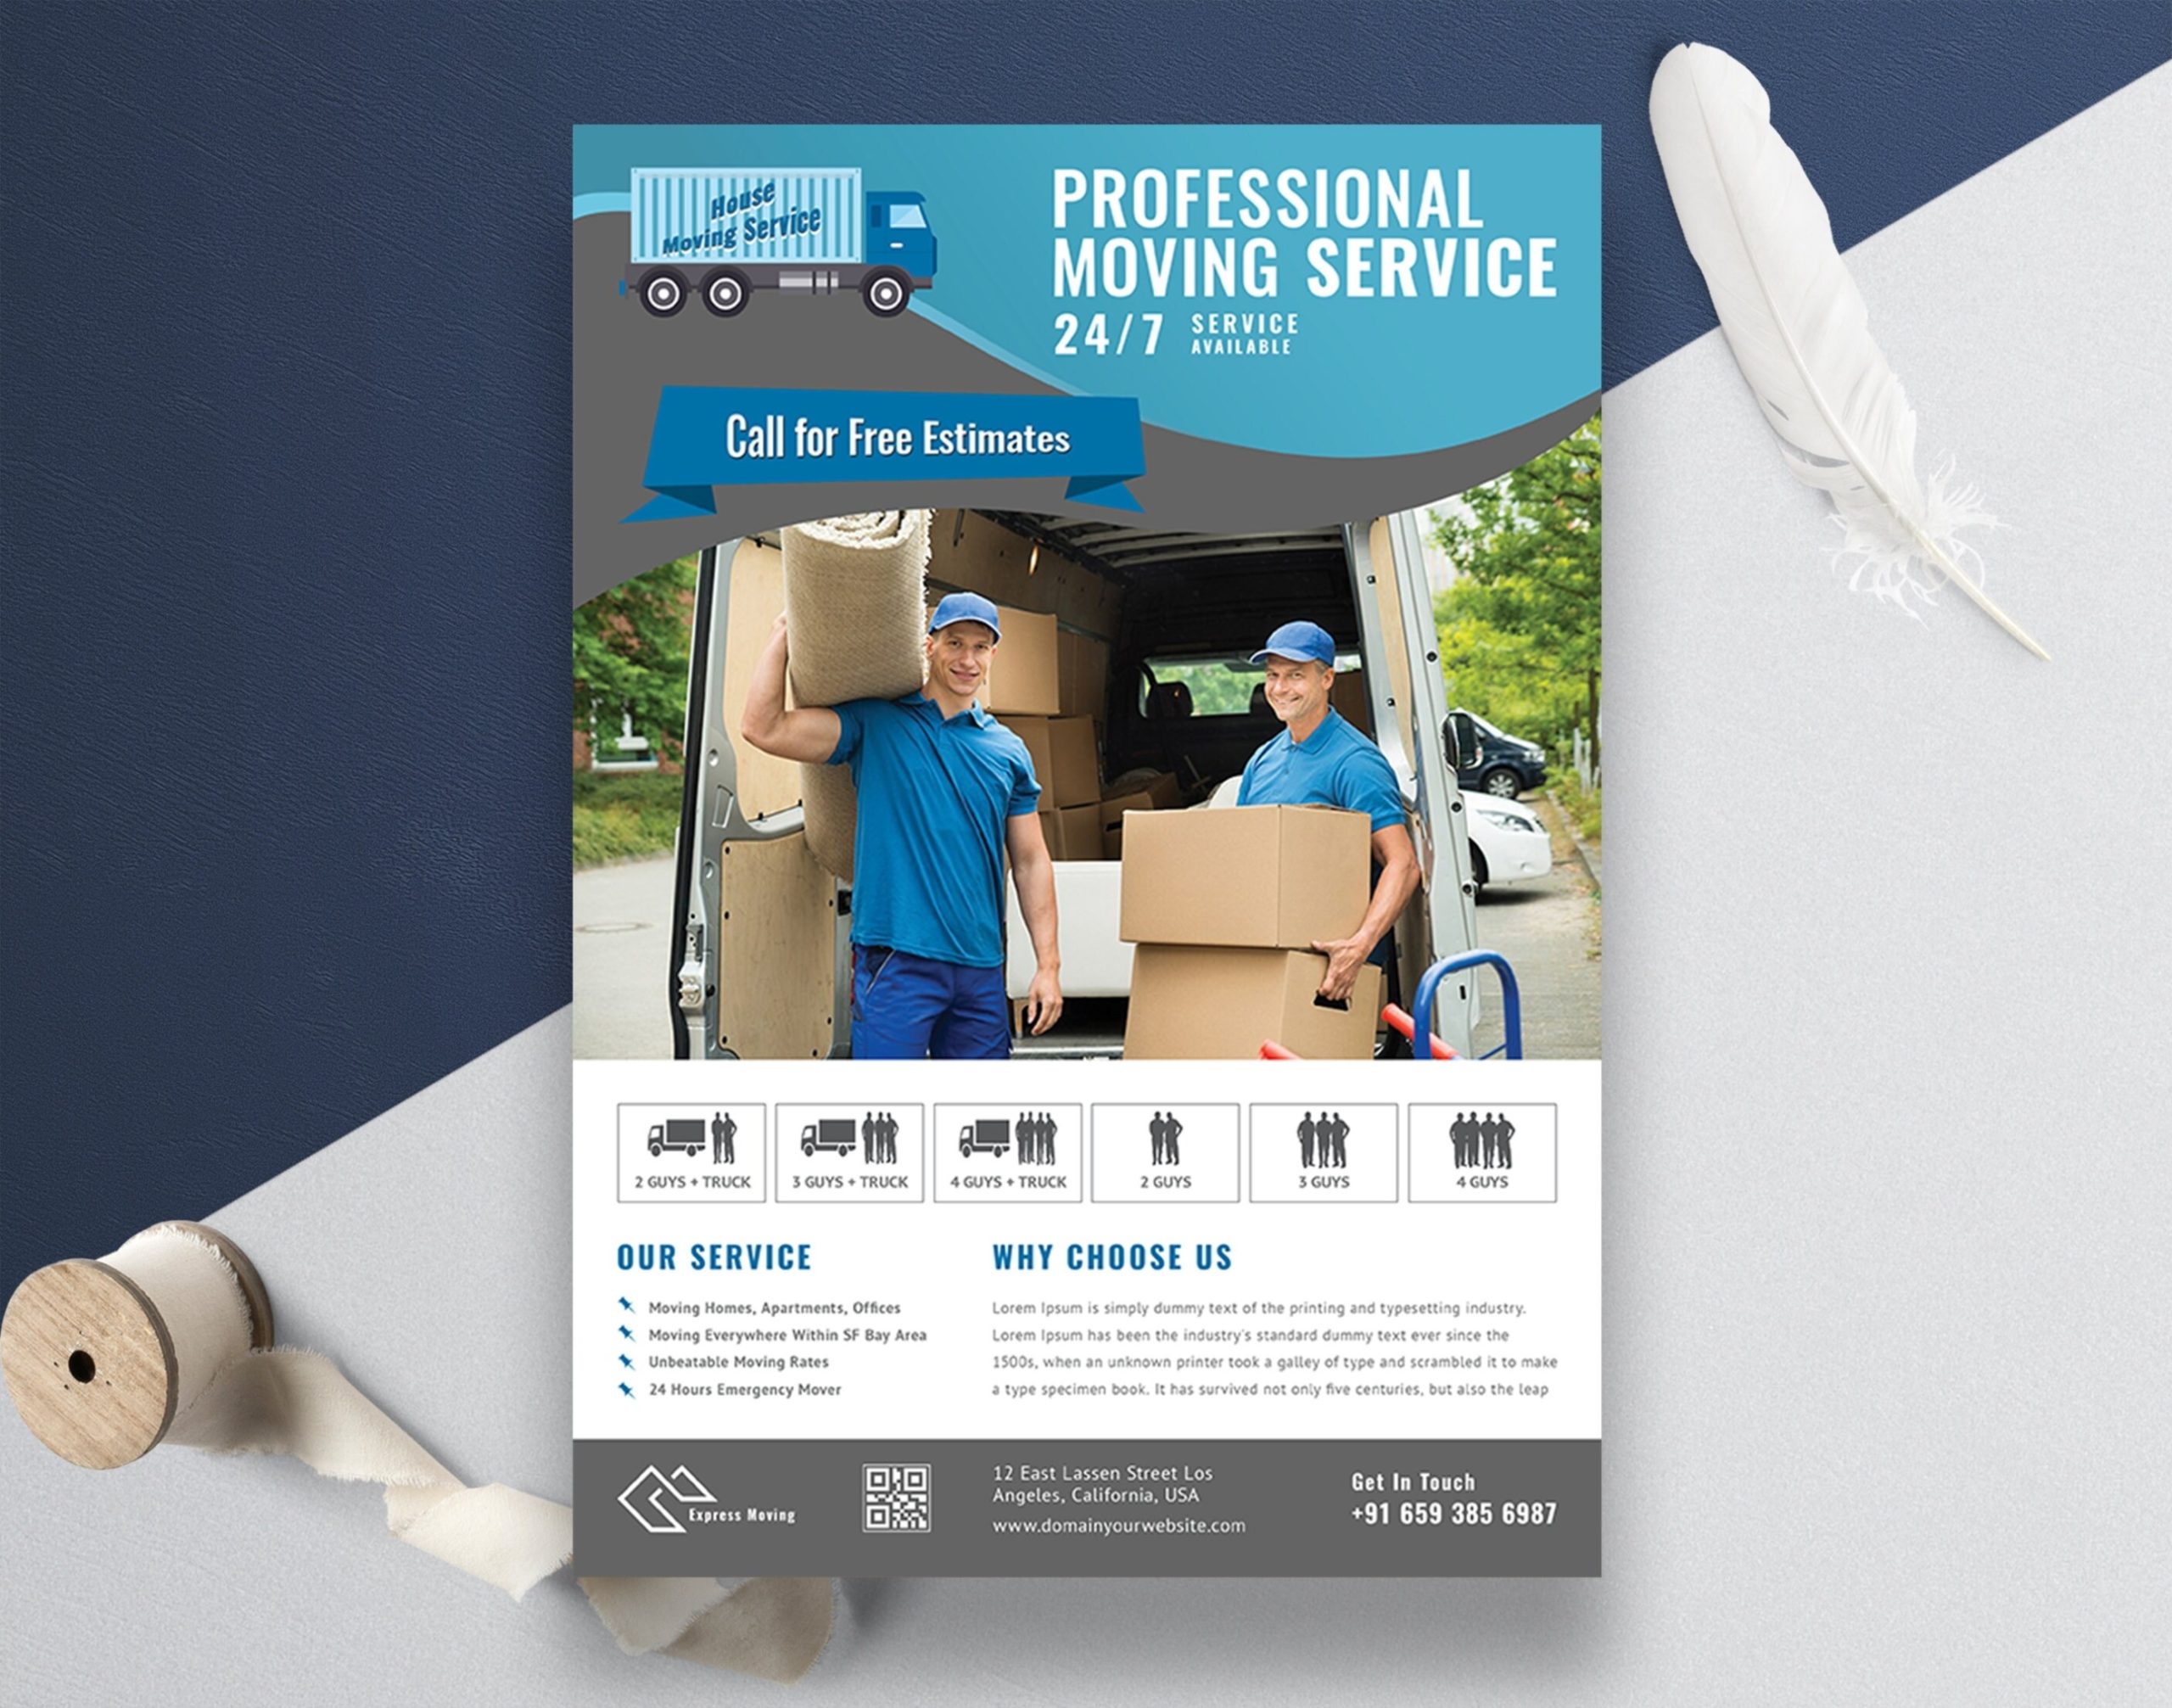 Moving Services Flyer Template Ms Word & Photoshop Files | Etsy Intended For Moving Flyer Template